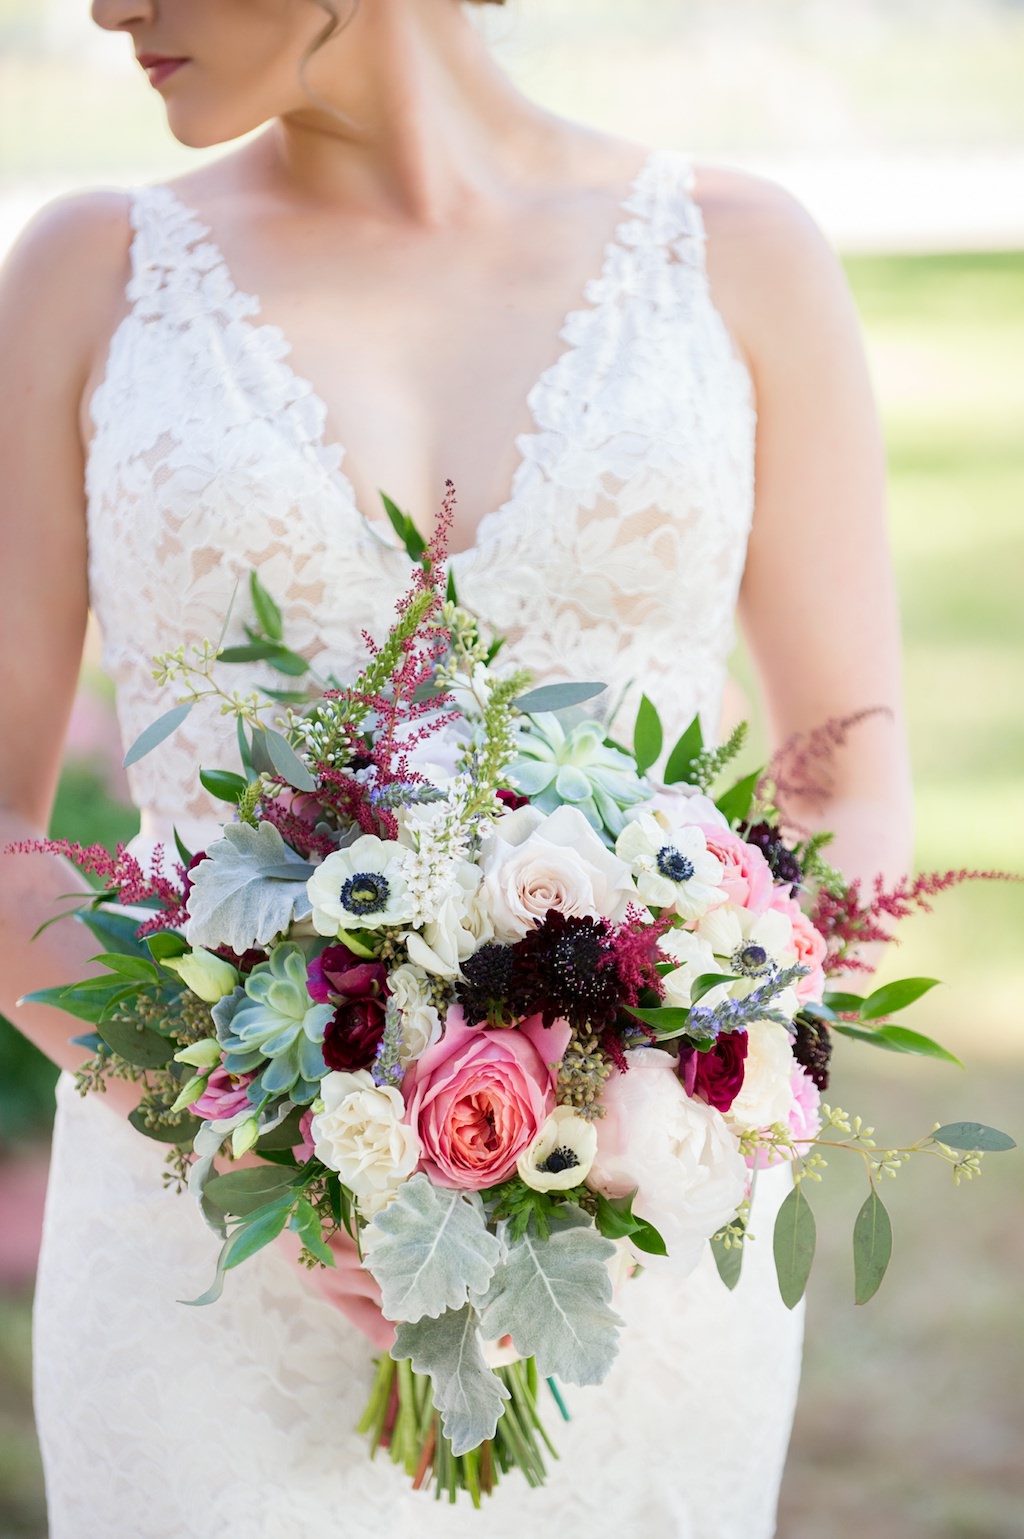 Outdoor Bridal Portrait in Illusion Lace V Neck Paloma Blanca Dress with Sage Greenery, Pink, Burgundy, Black and White Anemone Floral Bouquet | Sarasota Wedding Photographer Andi Diamond Photography